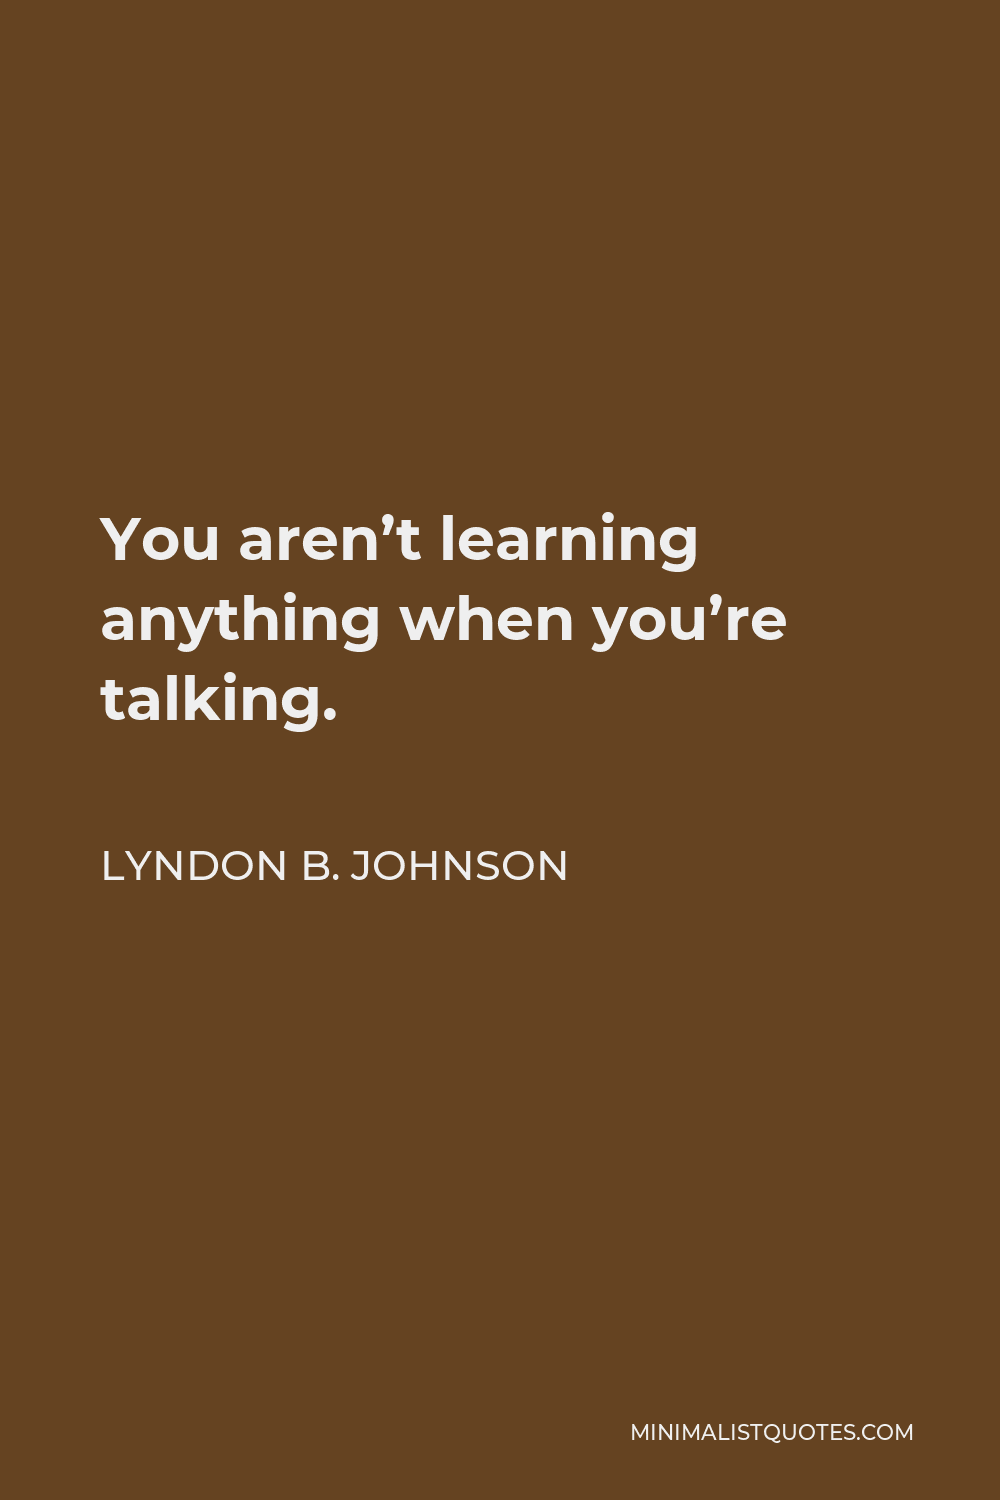 Lyndon B. Johnson Quote - You aren’t learning anything when you’re talking.